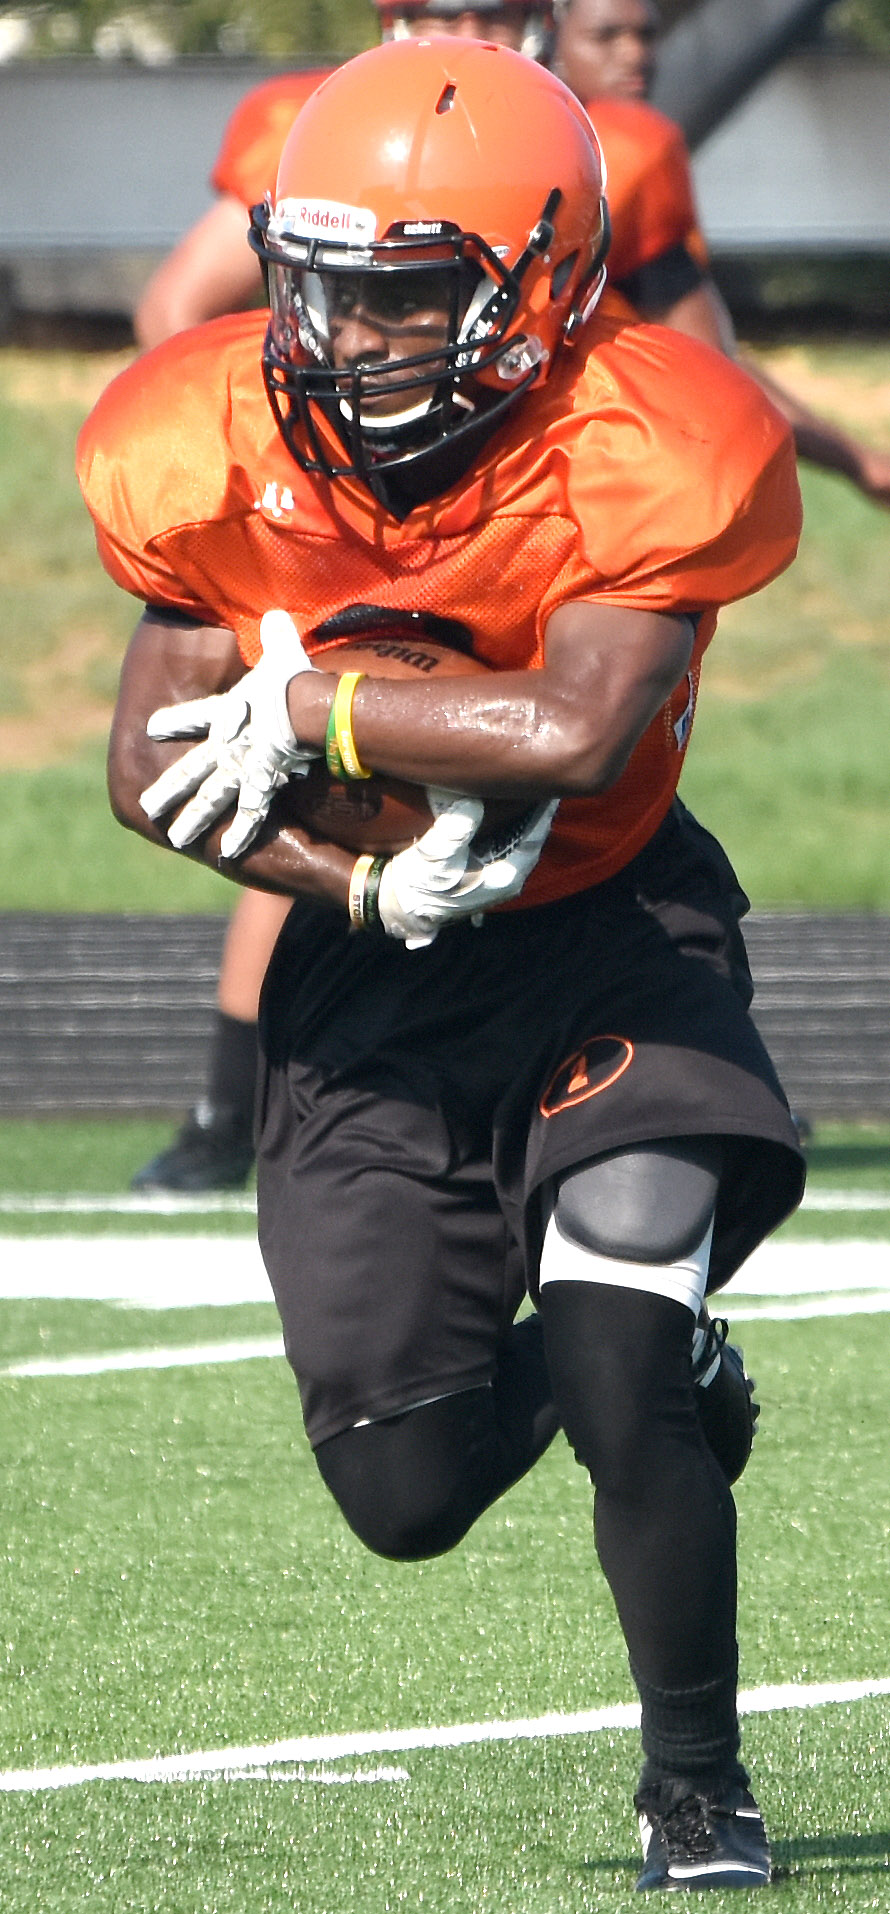 Jhalon Finley secures the ball as he gains ground during the scrimmage.